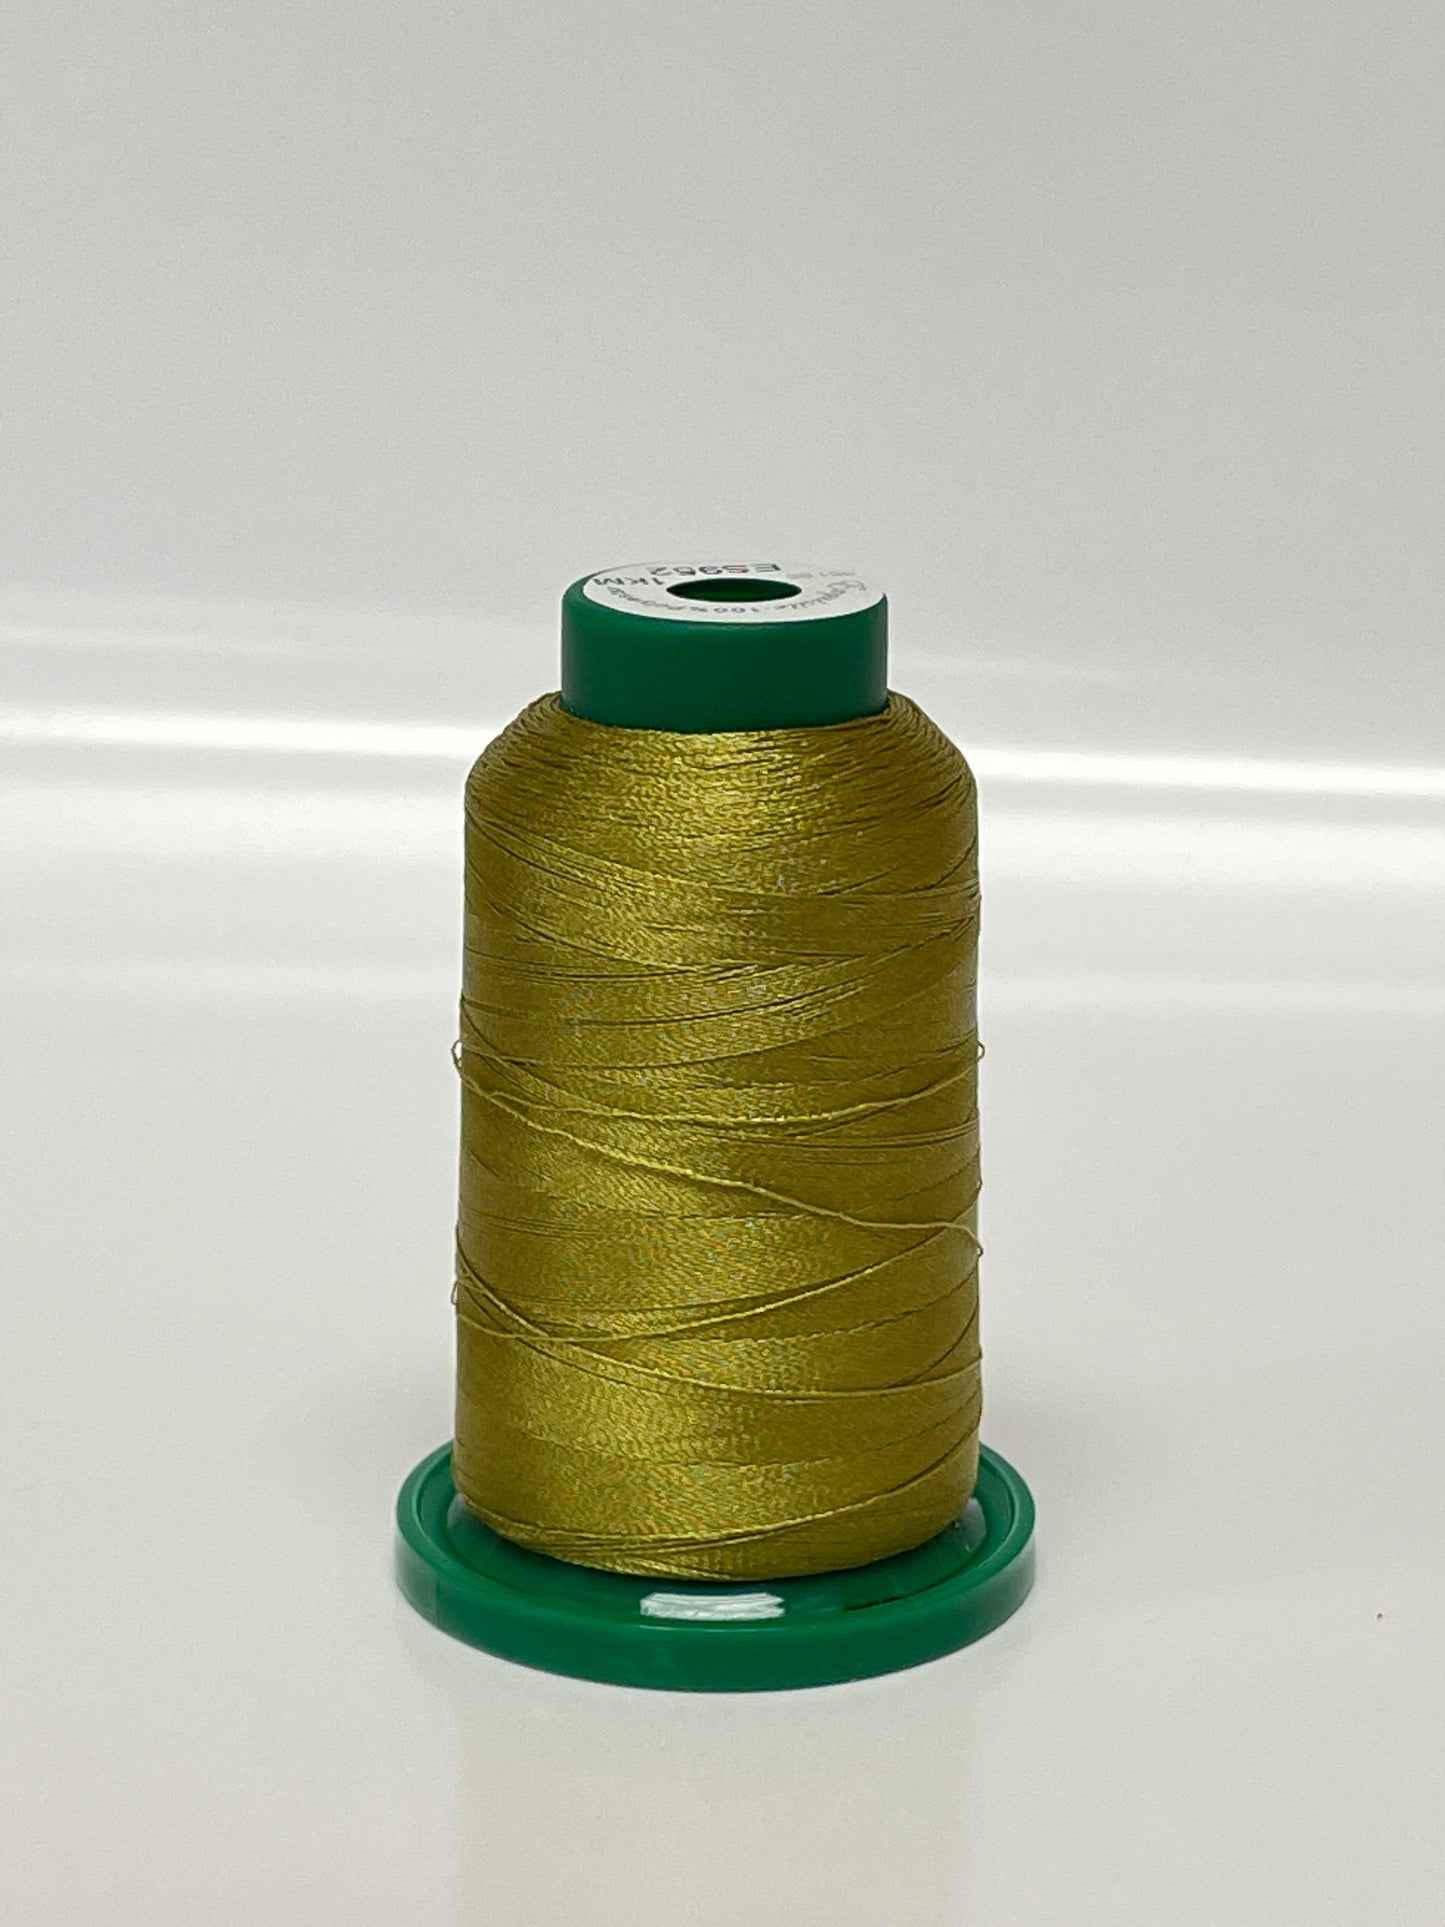 Exquisite Embroidery Threads - Greens